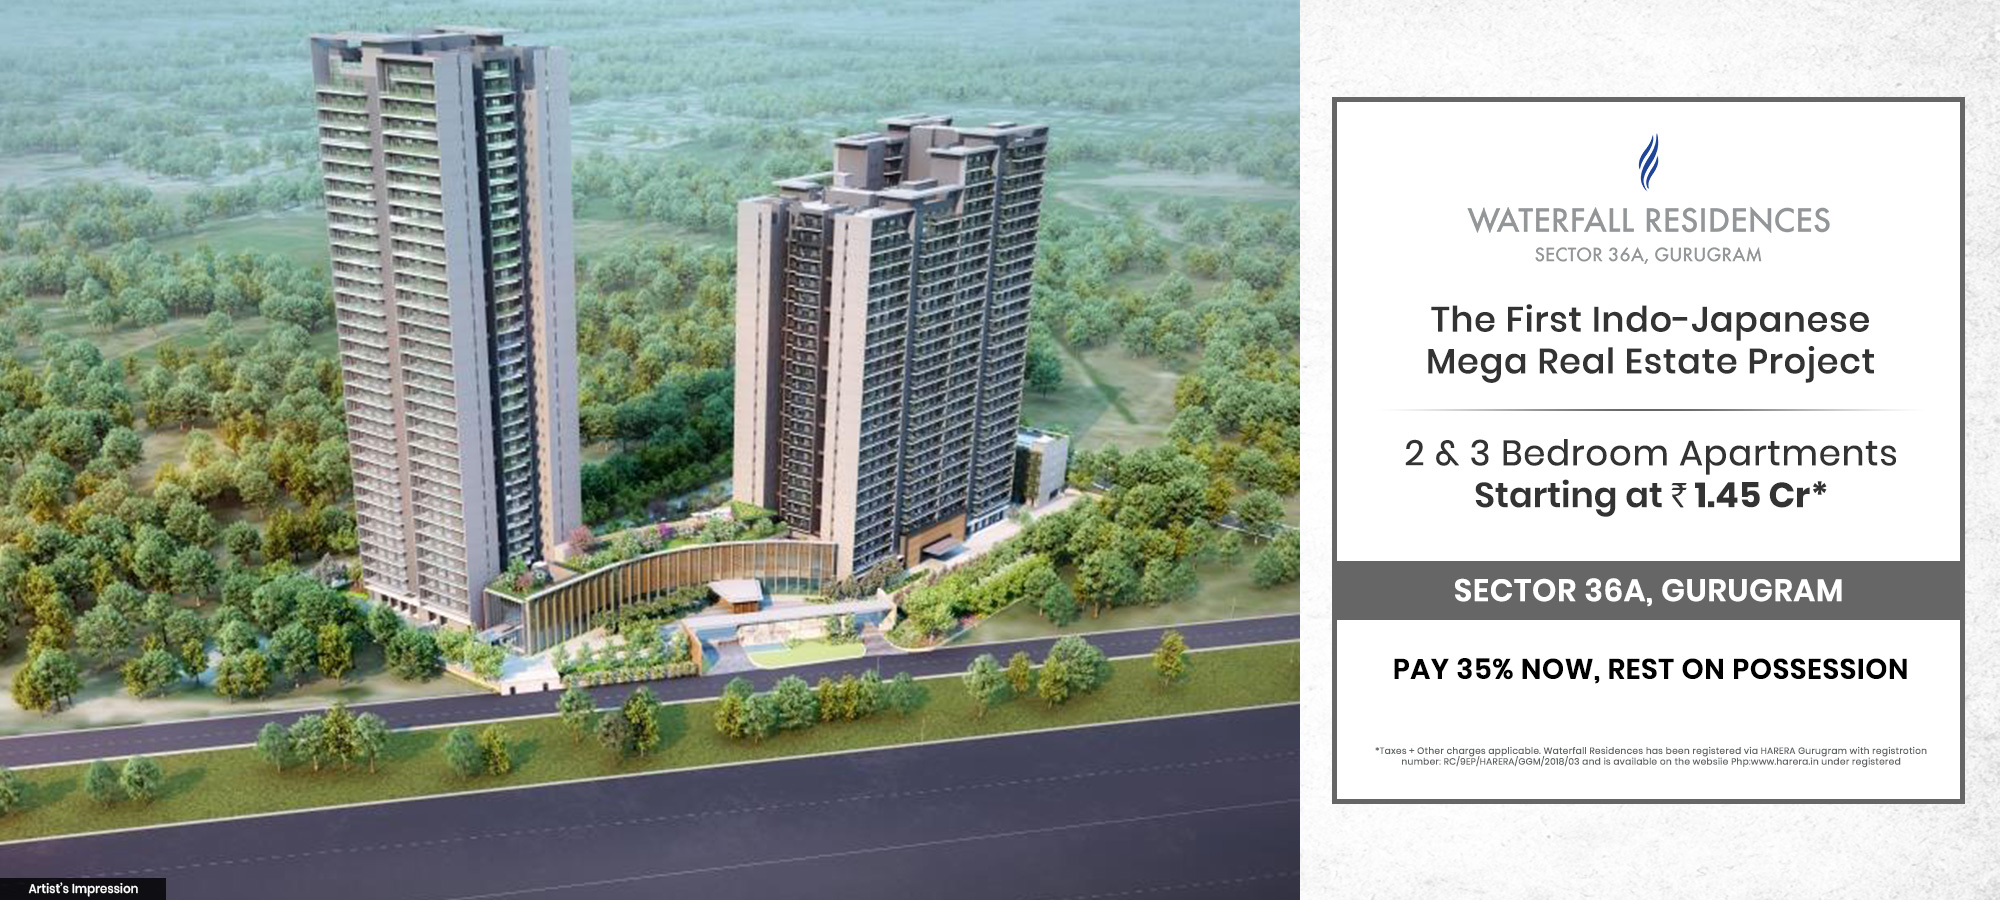 Pay 35% now, rest on possession at Krisumi Waterfall Residences, Gurgaon Update